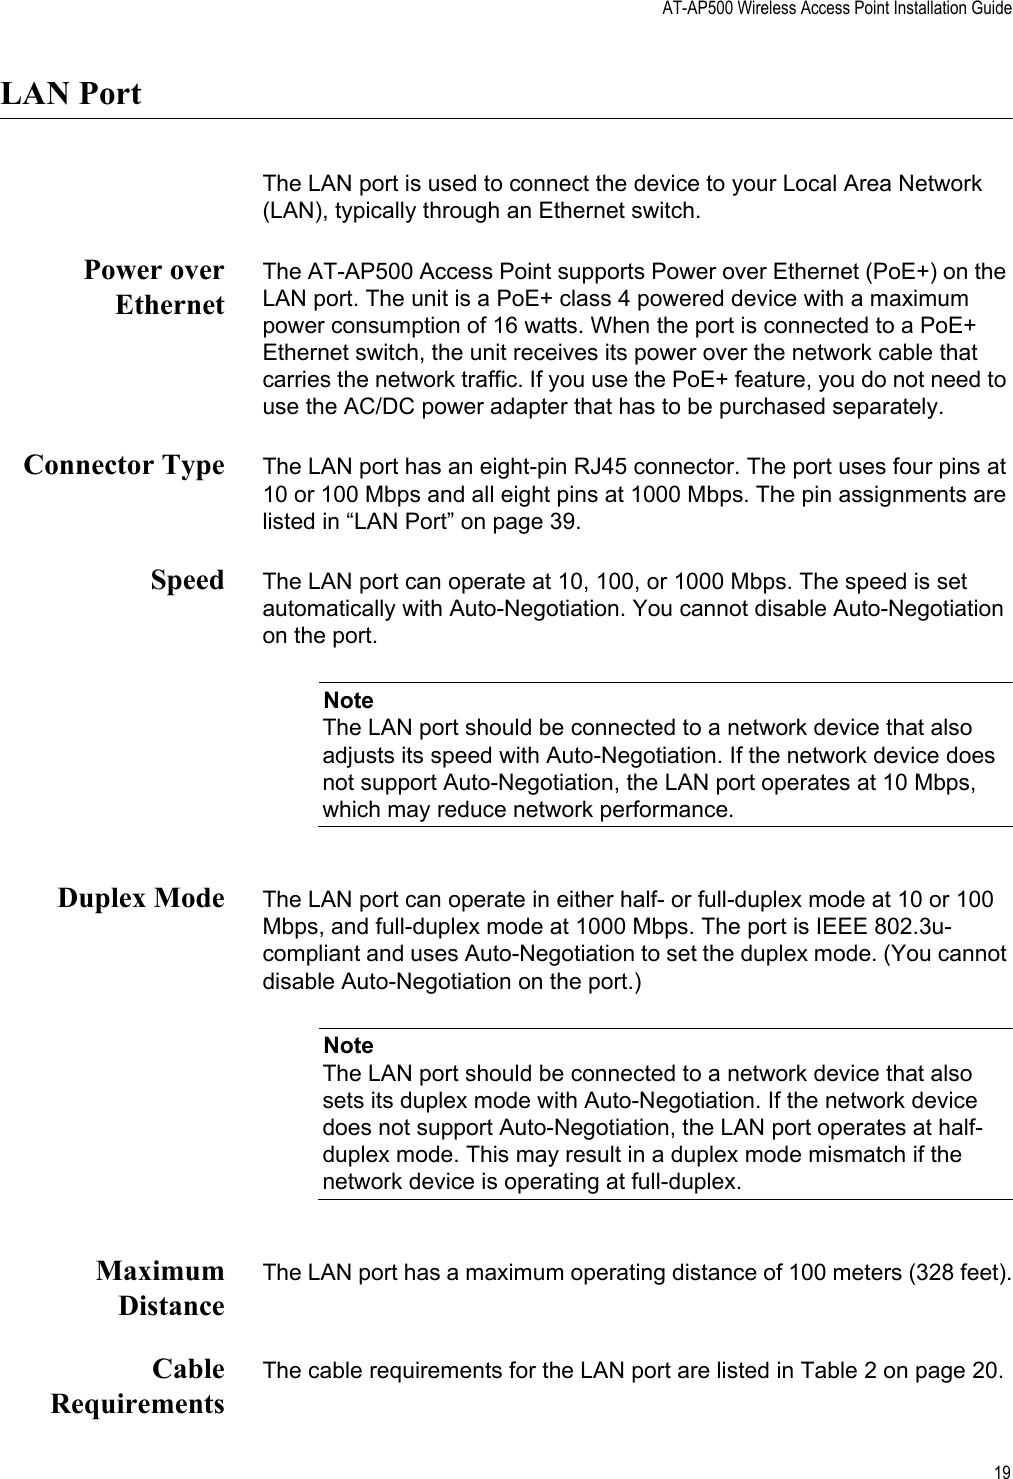 AT-AP500 Wireless Access Point Installation Guide19LAN PortThe LAN port is used to connect the device to your Local Area Network (LAN), typically through an Ethernet switch.Power overEthernetThe AT-AP500 Access Point supports Power over Ethernet (PoE+) on the LAN port. The unit is a PoE+ class 4 powered device with a maximum power consumption of 16 watts. When the port is connected to a PoE+ Ethernet switch, the unit receives its power over the network cable that carries the network traffic. If you use the PoE+ feature, you do not need to use the AC/DC power adapter that has to be purchased separately.Connector Type The LAN port has an eight-pin RJ45 connector. The port uses four pins at 10 or 100 Mbps and all eight pins at 1000 Mbps. The pin assignments are listed in “LAN Port” on page 39.Speed The LAN port can operate at 10, 100, or 1000 Mbps. The speed is set automatically with Auto-Negotiation. You cannot disable Auto-Negotiation on the port.NoteThe LAN port should be connected to a network device that also adjusts its speed with Auto-Negotiation. If the network device does not support Auto-Negotiation, the LAN port operates at 10 Mbps, which may reduce network performance.Duplex Mode The LAN port can operate in either half- or full-duplex mode at 10 or 100 Mbps, and full-duplex mode at 1000 Mbps. The port is IEEE 802.3u-compliant and uses Auto-Negotiation to set the duplex mode. (You cannot disable Auto-Negotiation on the port.)NoteThe LAN port should be connected to a network device that also sets its duplex mode with Auto-Negotiation. If the network device does not support Auto-Negotiation, the LAN port operates at half-duplex mode. This may result in a duplex mode mismatch if the network device is operating at full-duplex.MaximumDistanceThe LAN port has a maximum operating distance of 100 meters (328 feet).CableRequirementsThe cable requirements for the LAN port are listed in Table 2 on page 20. Review Draft 2-1-16